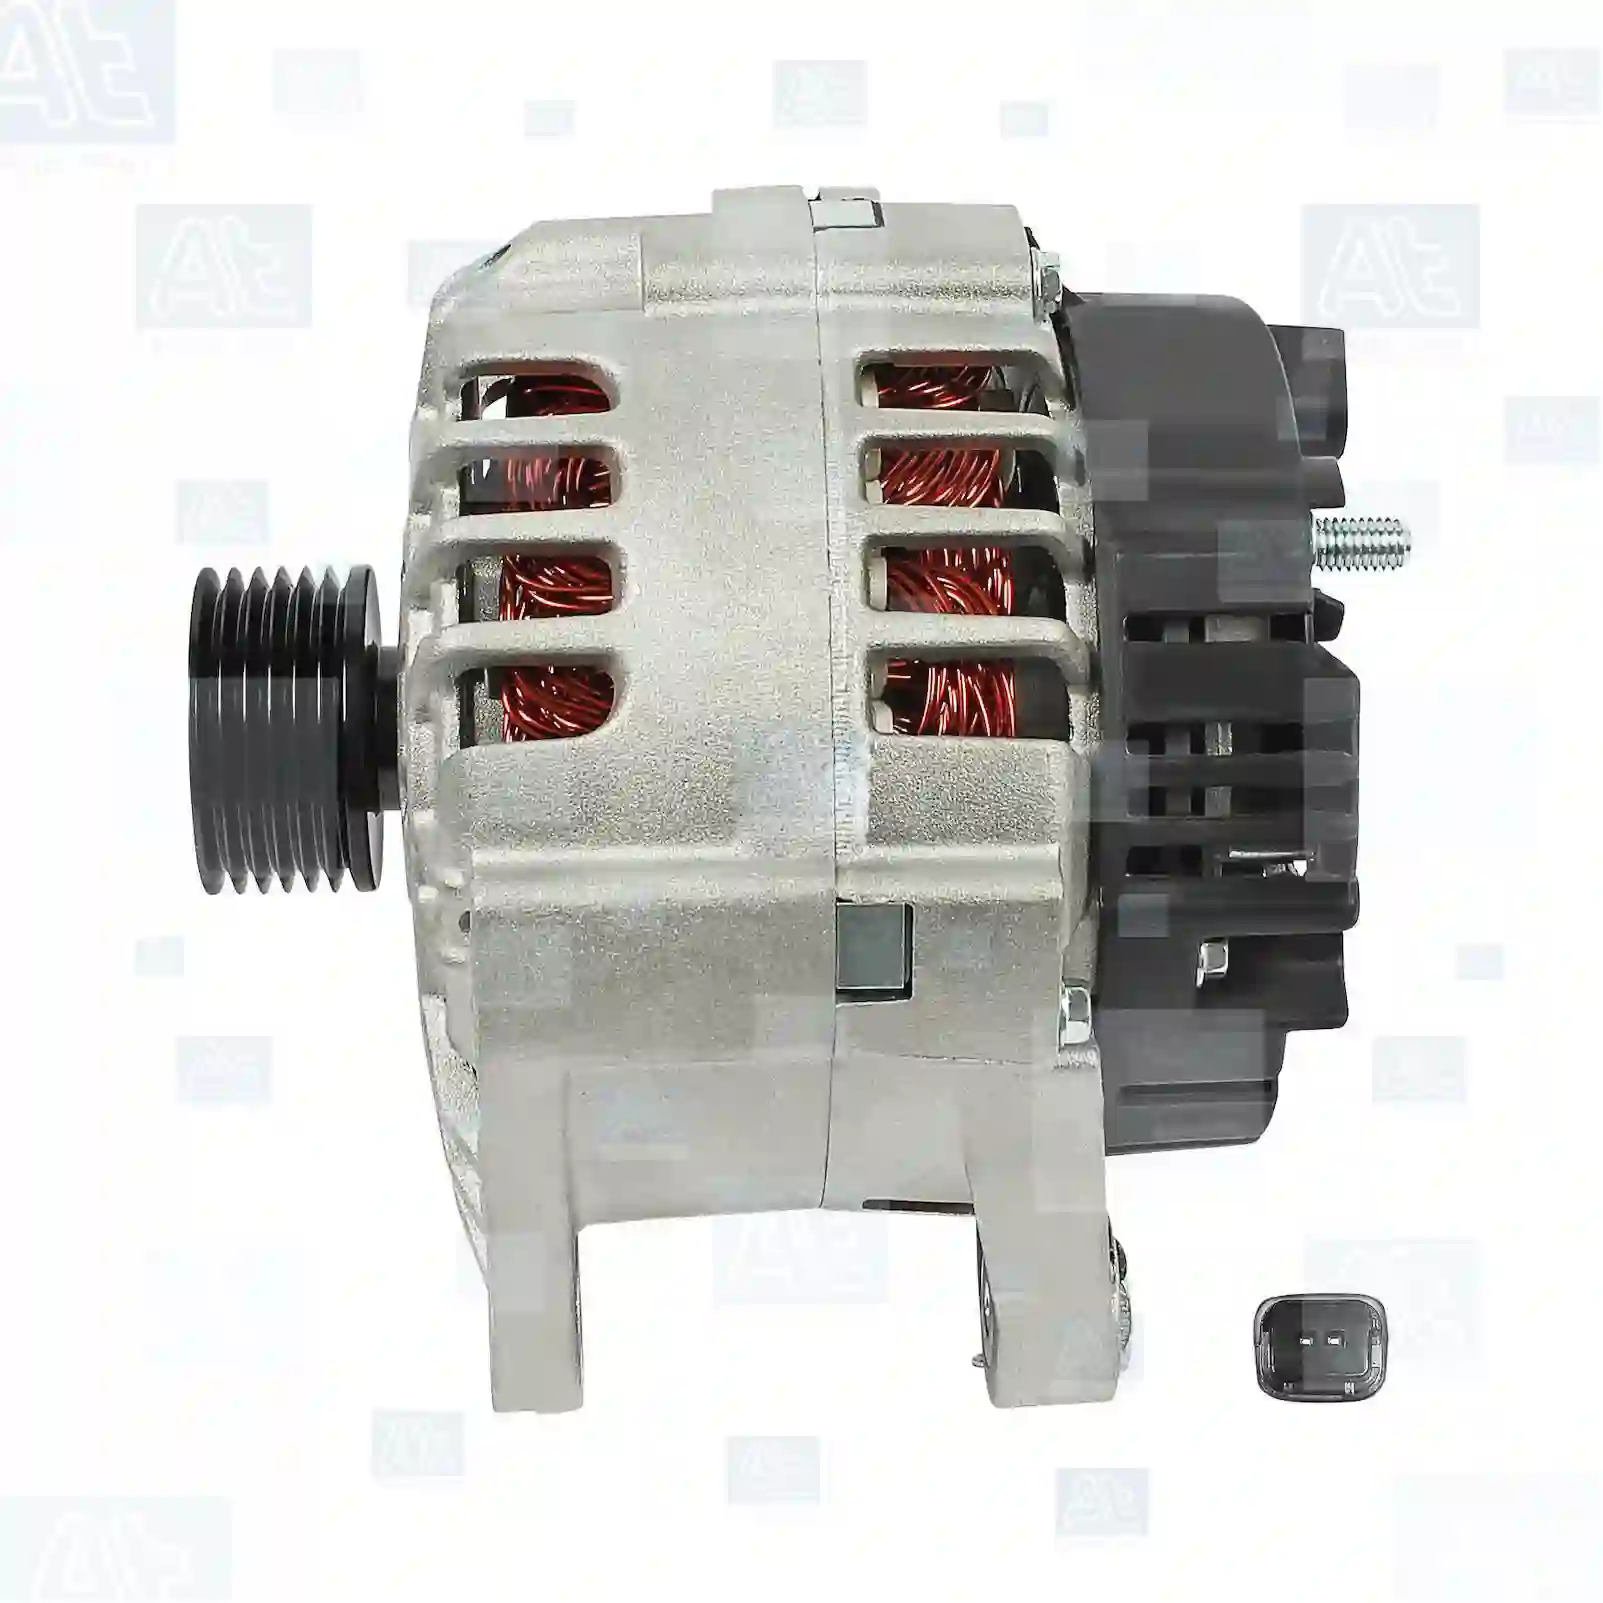 Alternator, 77710041, 6001548554, 7701473614, 7701476806, 7701477001, 8200022774, 8200523616, 4403540, 4433832, 4506176, 9111540, 9201826, 93160664, 93160665, 93160666, 93161035, 93161416, 93161425, 93161427, 93161923, 93169265, 93169471, 93189523, 93198179, 93198719, 2310000Q0A, 2310000Q0K, 2310000QAJ, 2310000QAK, 2310000QAM, 2310000QAP, 2310000QAU, 2310000QBF, 23100-00Q0A, 23100-00Q0E, 23100-00Q0K, 23100-00Q1F, 23100-00Q1G, 23100-00QA7, 23100-00QA8, 23100-00QAC, 23100-00QAE, 23100-00QAJ, 23100-00QAK, 23100-00QAM, 23100-00QAP, 23100-00QAU, 23100-00QBE, 23100-00QBF, 23100-00QBG, 23100-00QOA, 23100-00QOE, 23100-00QOK, 23100-BN700, 23100-BN704, 77004-27476, 1204189, 4403540, 4411316, 4411318, 4412503, 4416872, 4417295, 4419076, 4430012, 4430569, 4430587, 4430591, 4430595, 4433830, 4506176, 5281052700, 6001548554, 7700426849, 7700427476, 7701473614, 7701474416, 7701476806, 7701476807, 7701477001, 7701478093, 7711134313, 7711134314, 7711134316, 7711134329, 7711368834, 7711497093, 7711497095, 7711497616, 8200062583, 8200112055, 8200120286, 8200120417, 8200153713, 8200162474, 8200206251, 8200373636, 8200386806, 8200468131, 8200495302, 8200495304, 8200523616, 8200538407, 8200538816, 8200584040, 8200667608, 8200690190, 8200690199, 8200690202, 2543339, 36002231, 8251641, 8253785, 8253860, 8602279, 8602806, 8666126 ||  77710041 At Spare Part | Engine, Accelerator Pedal, Camshaft, Connecting Rod, Crankcase, Crankshaft, Cylinder Head, Engine Suspension Mountings, Exhaust Manifold, Exhaust Gas Recirculation, Filter Kits, Flywheel Housing, General Overhaul Kits, Engine, Intake Manifold, Oil Cleaner, Oil Cooler, Oil Filter, Oil Pump, Oil Sump, Piston & Liner, Sensor & Switch, Timing Case, Turbocharger, Cooling System, Belt Tensioner, Coolant Filter, Coolant Pipe, Corrosion Prevention Agent, Drive, Expansion Tank, Fan, Intercooler, Monitors & Gauges, Radiator, Thermostat, V-Belt / Timing belt, Water Pump, Fuel System, Electronical Injector Unit, Feed Pump, Fuel Filter, cpl., Fuel Gauge Sender,  Fuel Line, Fuel Pump, Fuel Tank, Injection Line Kit, Injection Pump, Exhaust System, Clutch & Pedal, Gearbox, Propeller Shaft, Axles, Brake System, Hubs & Wheels, Suspension, Leaf Spring, Universal Parts / Accessories, Steering, Electrical System, Cabin Alternator, 77710041, 6001548554, 7701473614, 7701476806, 7701477001, 8200022774, 8200523616, 4403540, 4433832, 4506176, 9111540, 9201826, 93160664, 93160665, 93160666, 93161035, 93161416, 93161425, 93161427, 93161923, 93169265, 93169471, 93189523, 93198179, 93198719, 2310000Q0A, 2310000Q0K, 2310000QAJ, 2310000QAK, 2310000QAM, 2310000QAP, 2310000QAU, 2310000QBF, 23100-00Q0A, 23100-00Q0E, 23100-00Q0K, 23100-00Q1F, 23100-00Q1G, 23100-00QA7, 23100-00QA8, 23100-00QAC, 23100-00QAE, 23100-00QAJ, 23100-00QAK, 23100-00QAM, 23100-00QAP, 23100-00QAU, 23100-00QBE, 23100-00QBF, 23100-00QBG, 23100-00QOA, 23100-00QOE, 23100-00QOK, 23100-BN700, 23100-BN704, 77004-27476, 1204189, 4403540, 4411316, 4411318, 4412503, 4416872, 4417295, 4419076, 4430012, 4430569, 4430587, 4430591, 4430595, 4433830, 4506176, 5281052700, 6001548554, 7700426849, 7700427476, 7701473614, 7701474416, 7701476806, 7701476807, 7701477001, 7701478093, 7711134313, 7711134314, 7711134316, 7711134329, 7711368834, 7711497093, 7711497095, 7711497616, 8200062583, 8200112055, 8200120286, 8200120417, 8200153713, 8200162474, 8200206251, 8200373636, 8200386806, 8200468131, 8200495302, 8200495304, 8200523616, 8200538407, 8200538816, 8200584040, 8200667608, 8200690190, 8200690199, 8200690202, 2543339, 36002231, 8251641, 8253785, 8253860, 8602279, 8602806, 8666126 ||  77710041 At Spare Part | Engine, Accelerator Pedal, Camshaft, Connecting Rod, Crankcase, Crankshaft, Cylinder Head, Engine Suspension Mountings, Exhaust Manifold, Exhaust Gas Recirculation, Filter Kits, Flywheel Housing, General Overhaul Kits, Engine, Intake Manifold, Oil Cleaner, Oil Cooler, Oil Filter, Oil Pump, Oil Sump, Piston & Liner, Sensor & Switch, Timing Case, Turbocharger, Cooling System, Belt Tensioner, Coolant Filter, Coolant Pipe, Corrosion Prevention Agent, Drive, Expansion Tank, Fan, Intercooler, Monitors & Gauges, Radiator, Thermostat, V-Belt / Timing belt, Water Pump, Fuel System, Electronical Injector Unit, Feed Pump, Fuel Filter, cpl., Fuel Gauge Sender,  Fuel Line, Fuel Pump, Fuel Tank, Injection Line Kit, Injection Pump, Exhaust System, Clutch & Pedal, Gearbox, Propeller Shaft, Axles, Brake System, Hubs & Wheels, Suspension, Leaf Spring, Universal Parts / Accessories, Steering, Electrical System, Cabin